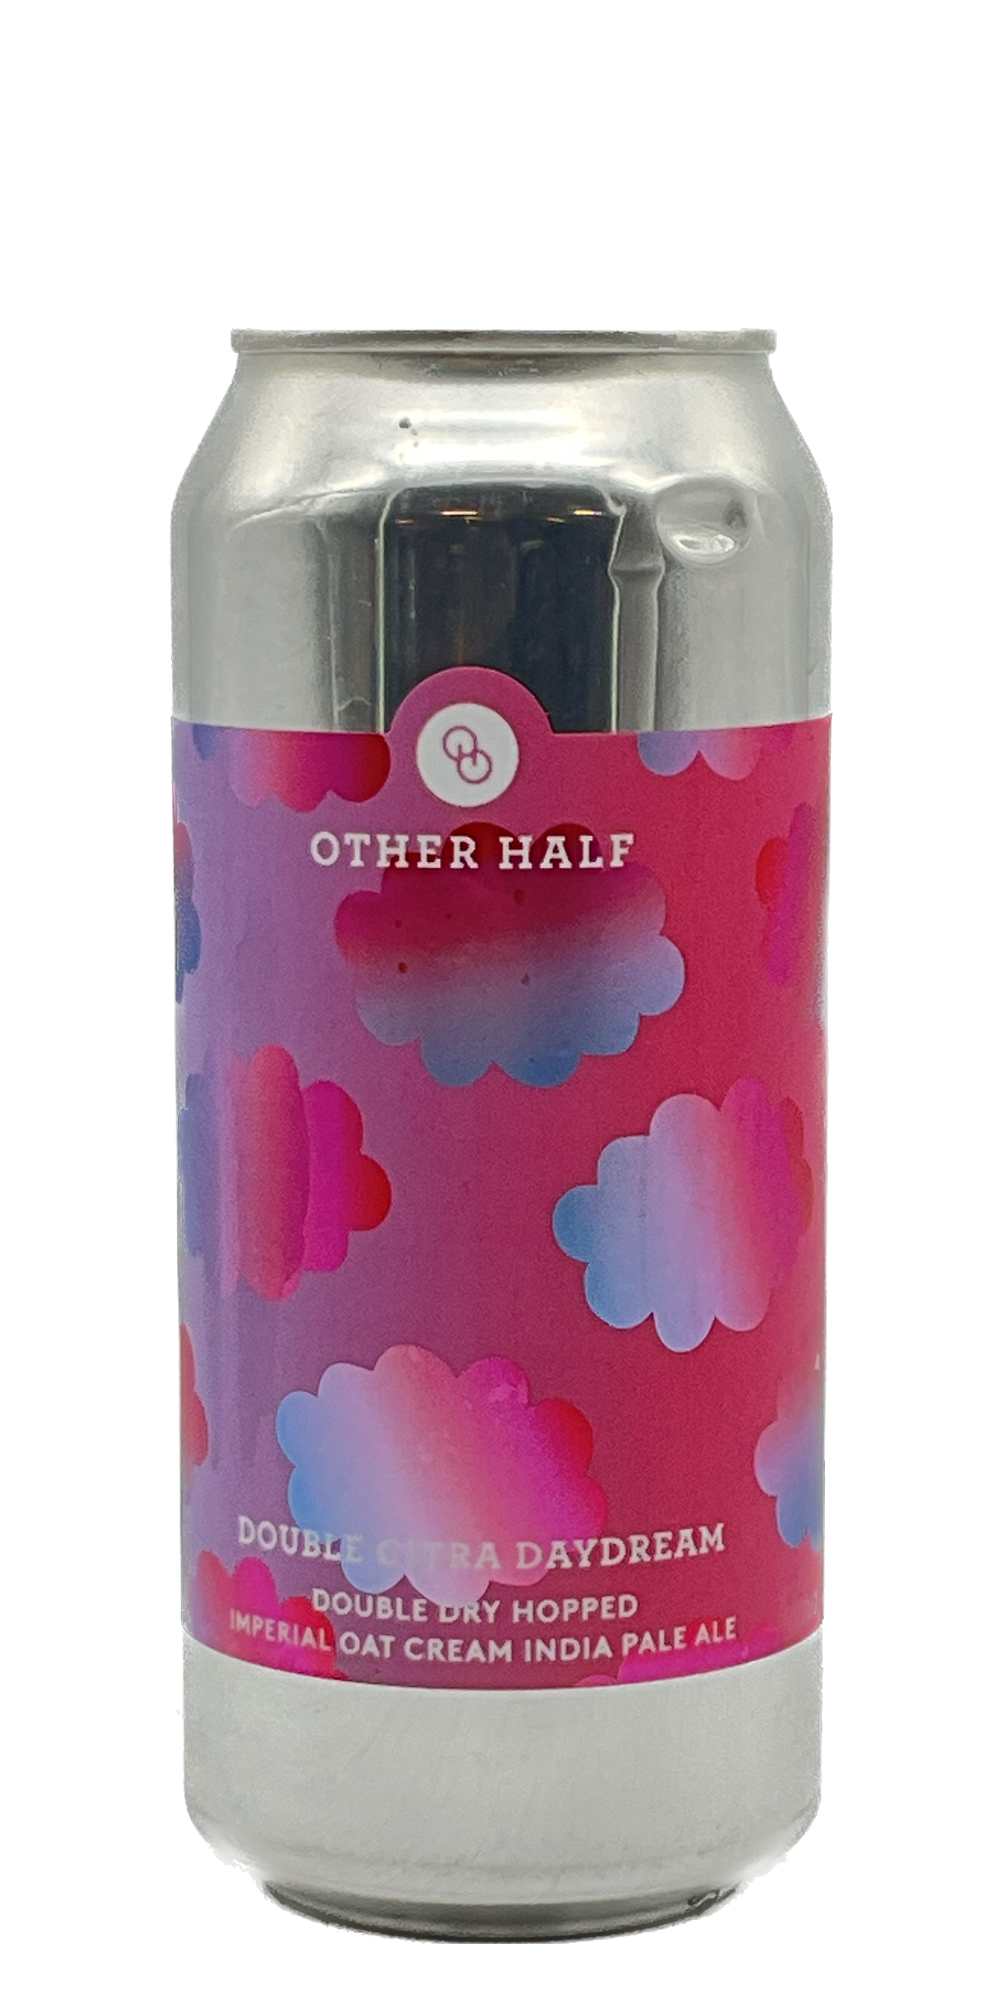 Other Half - DDH Double Citra Daydream